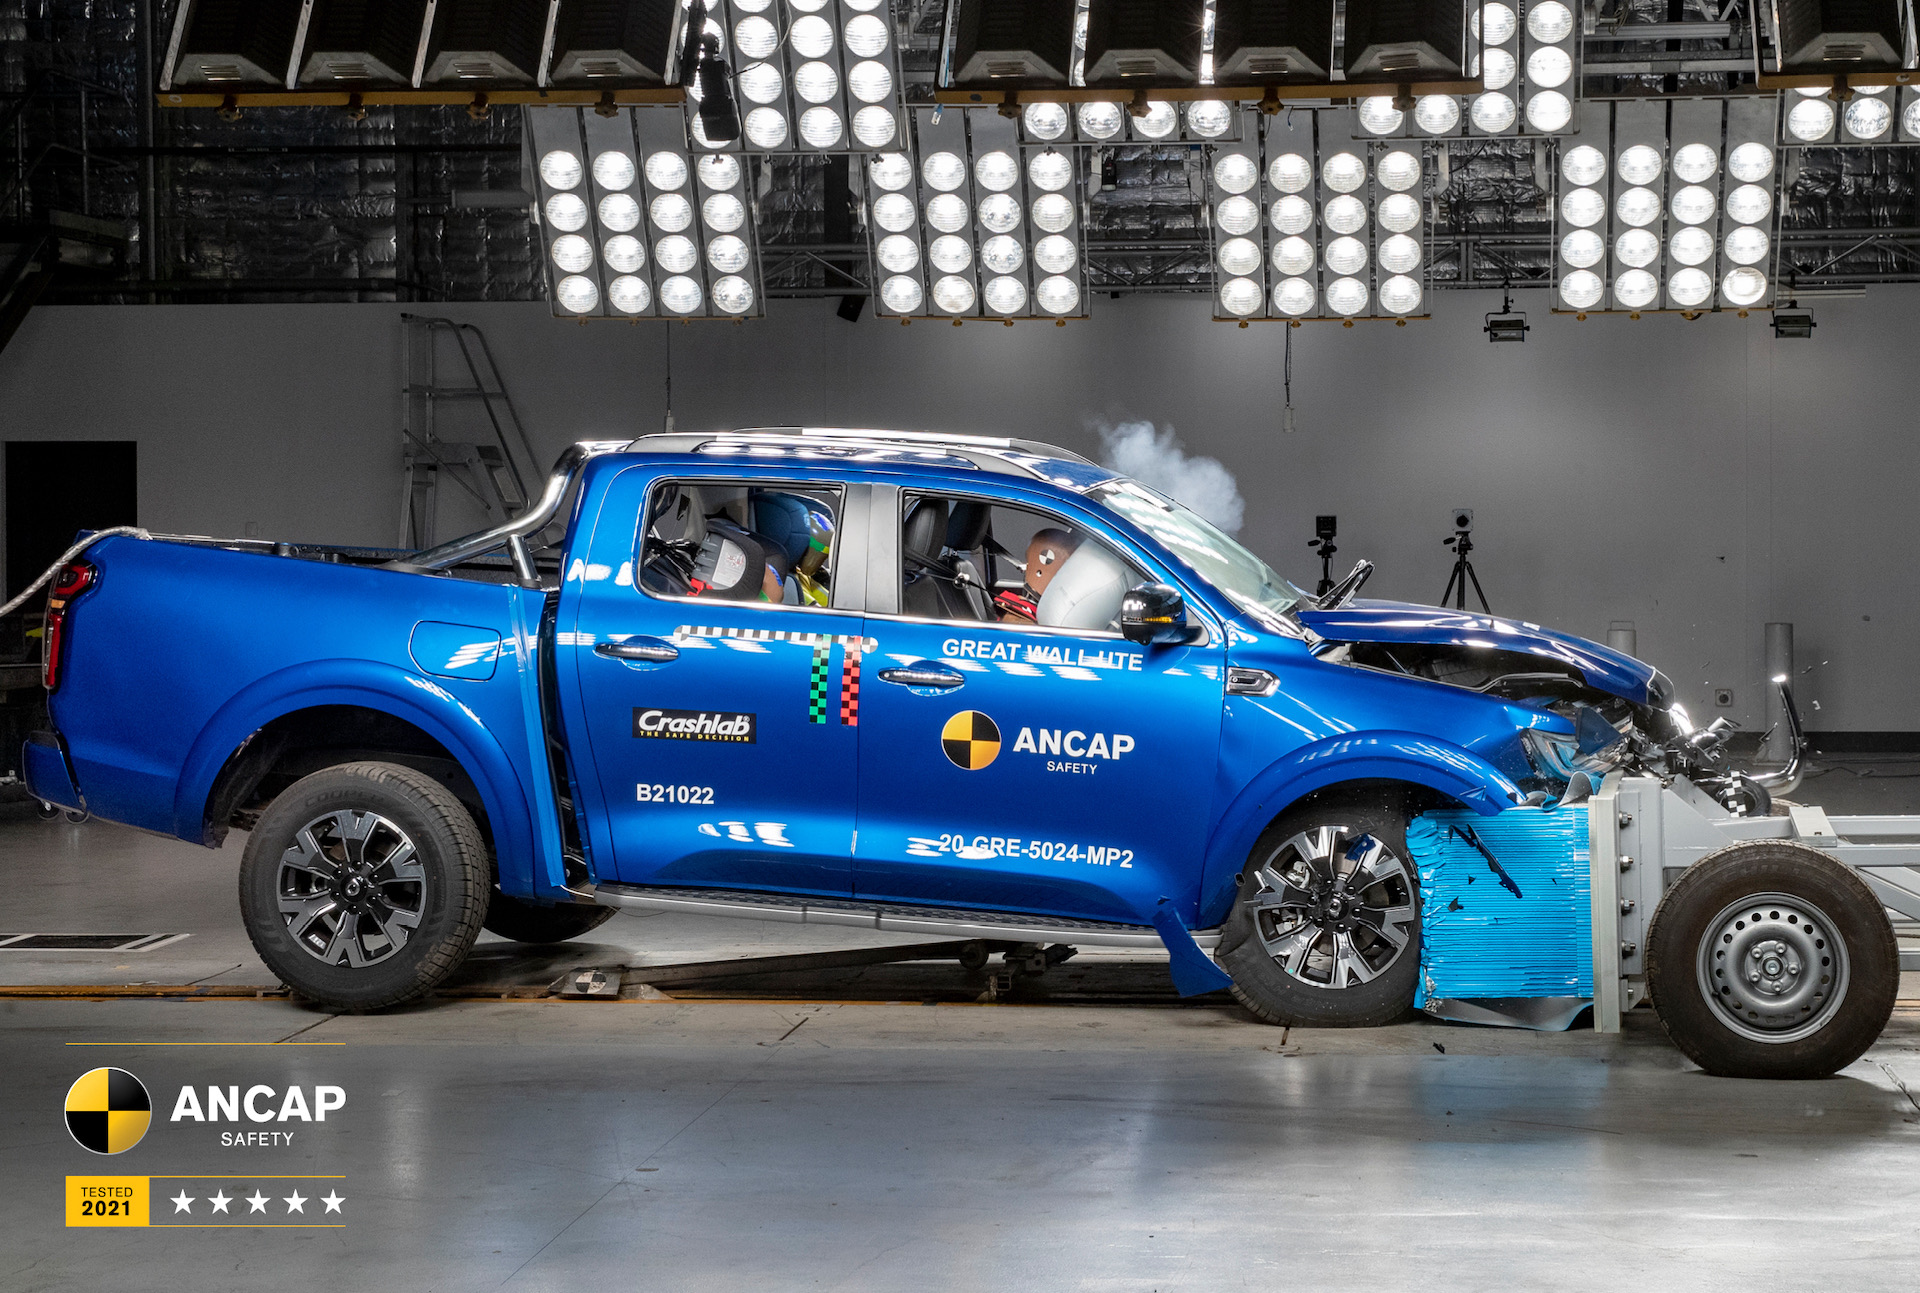 GWM Ute awarded 5-star ANCAP safety, only models built from August 2021